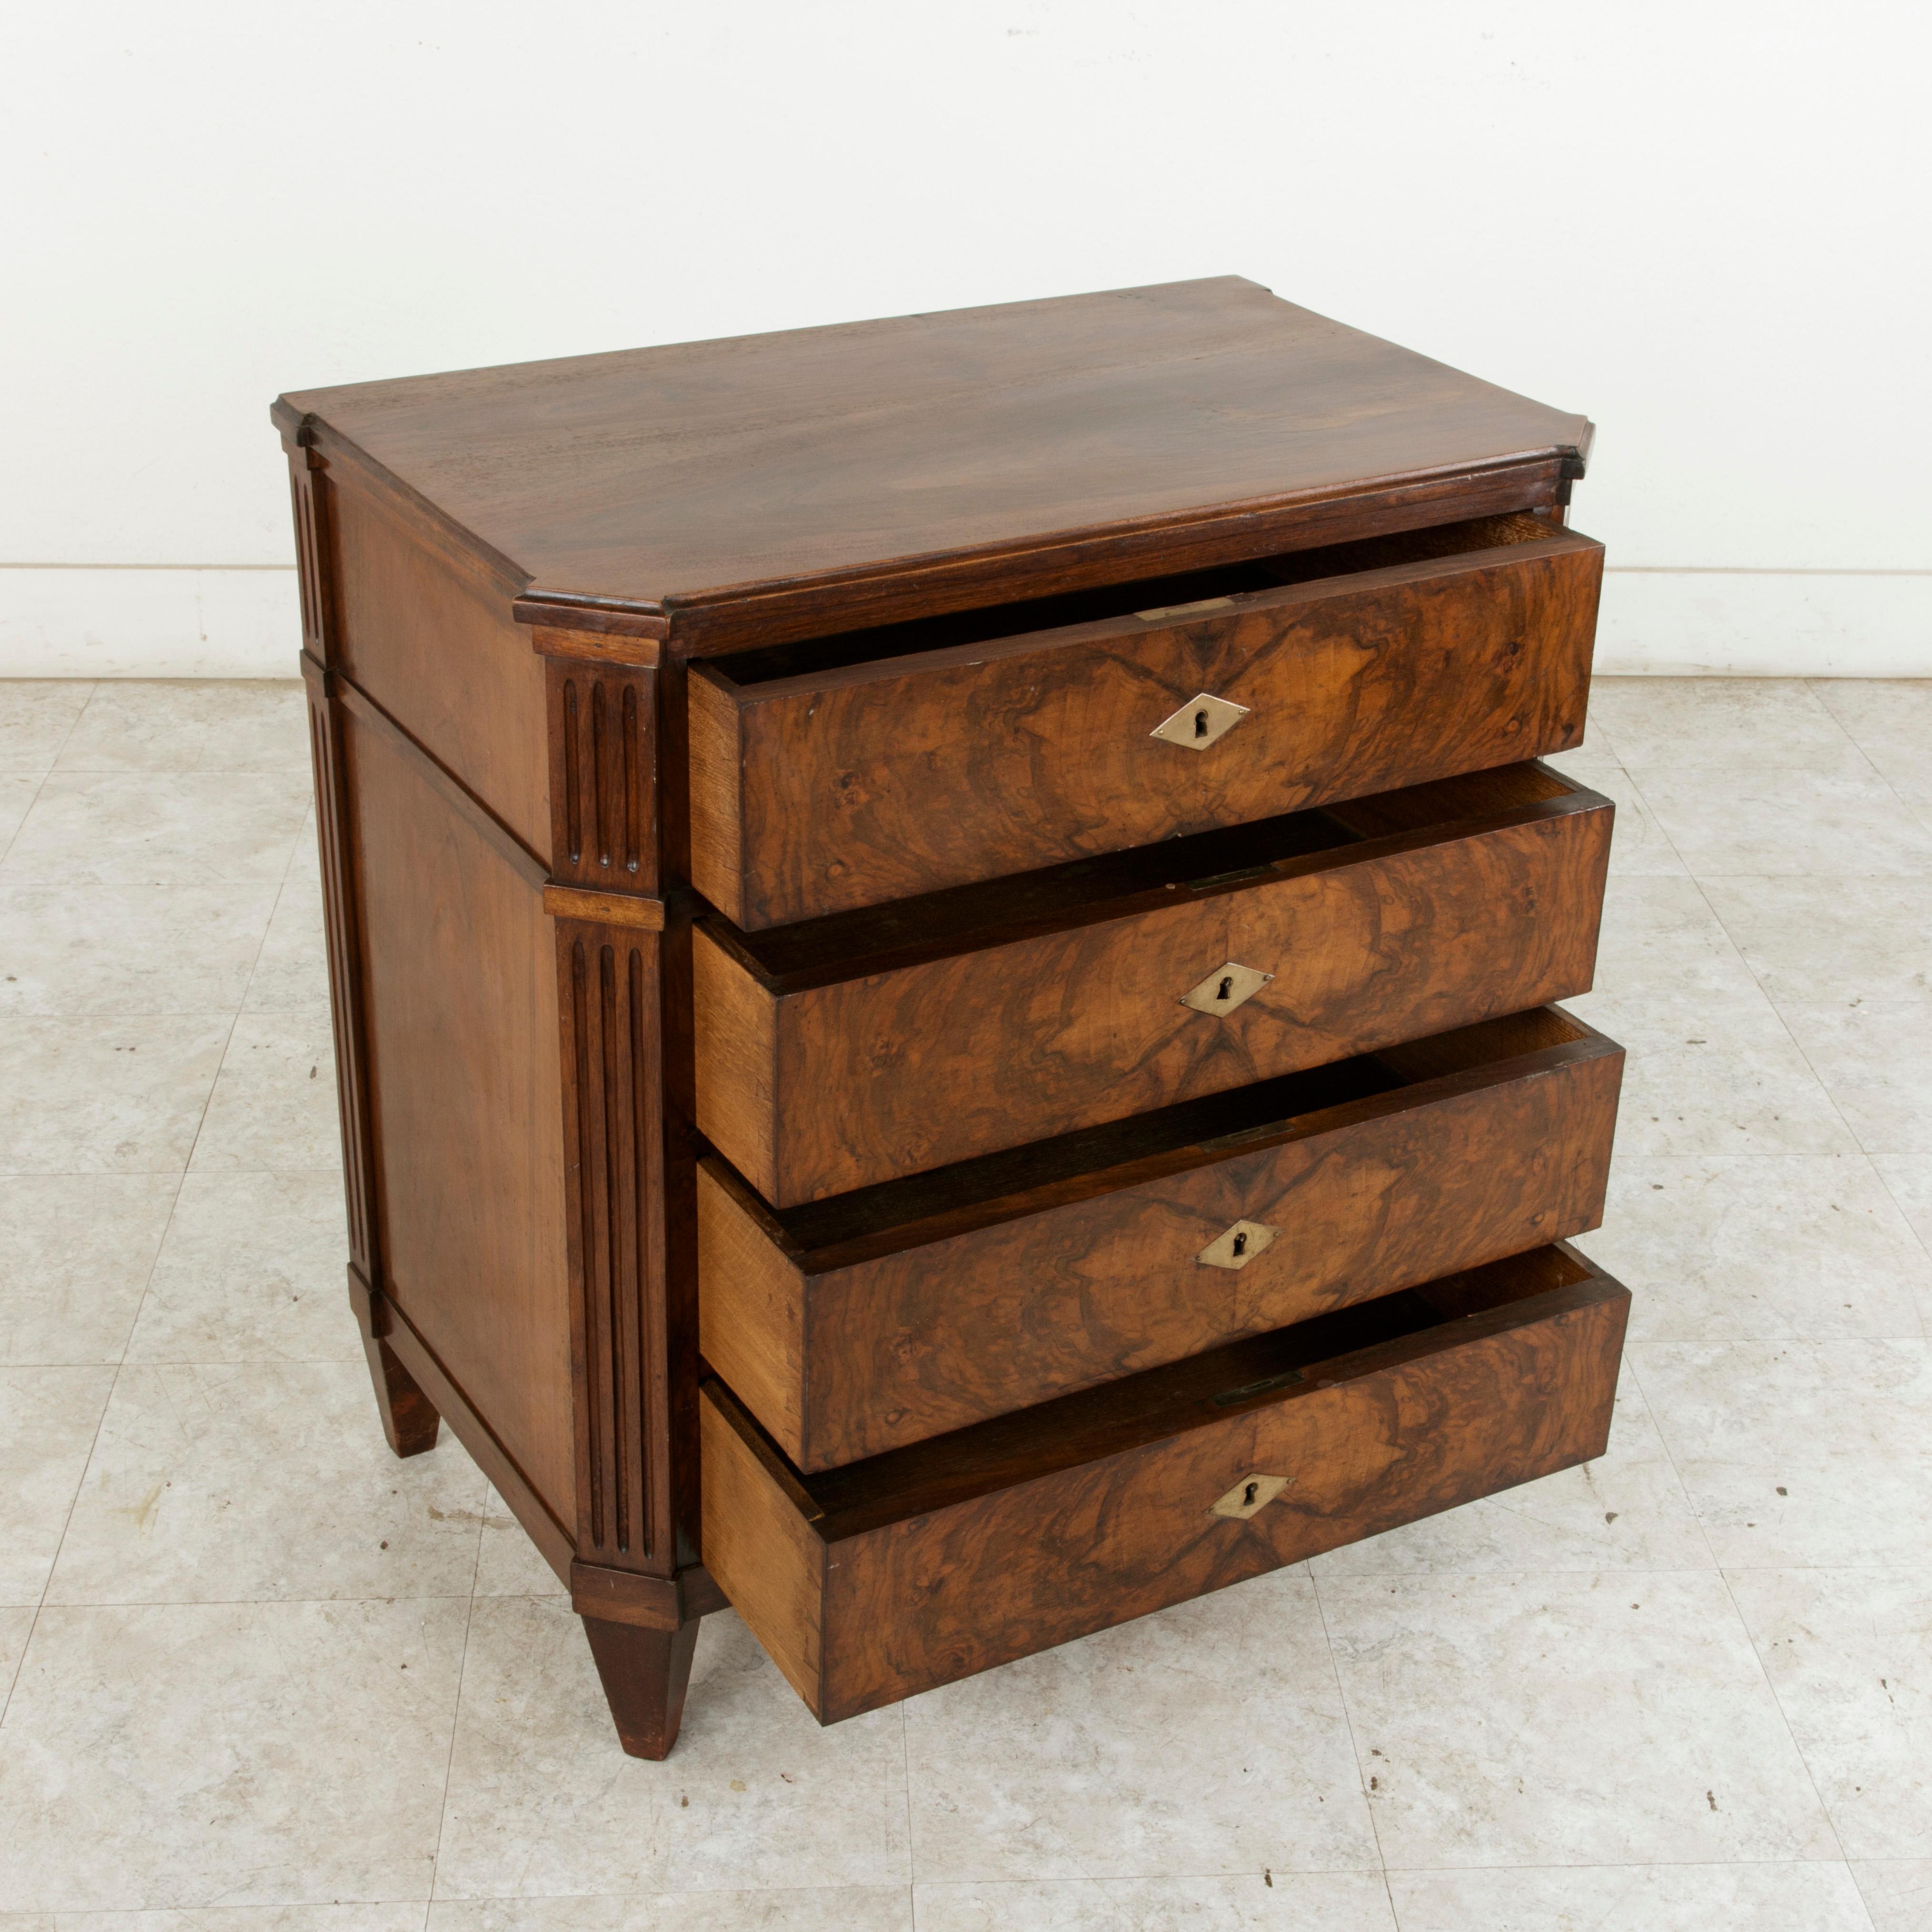 Late 19th Century French Burl Walnut Commode, Chest, or Nightstand 3